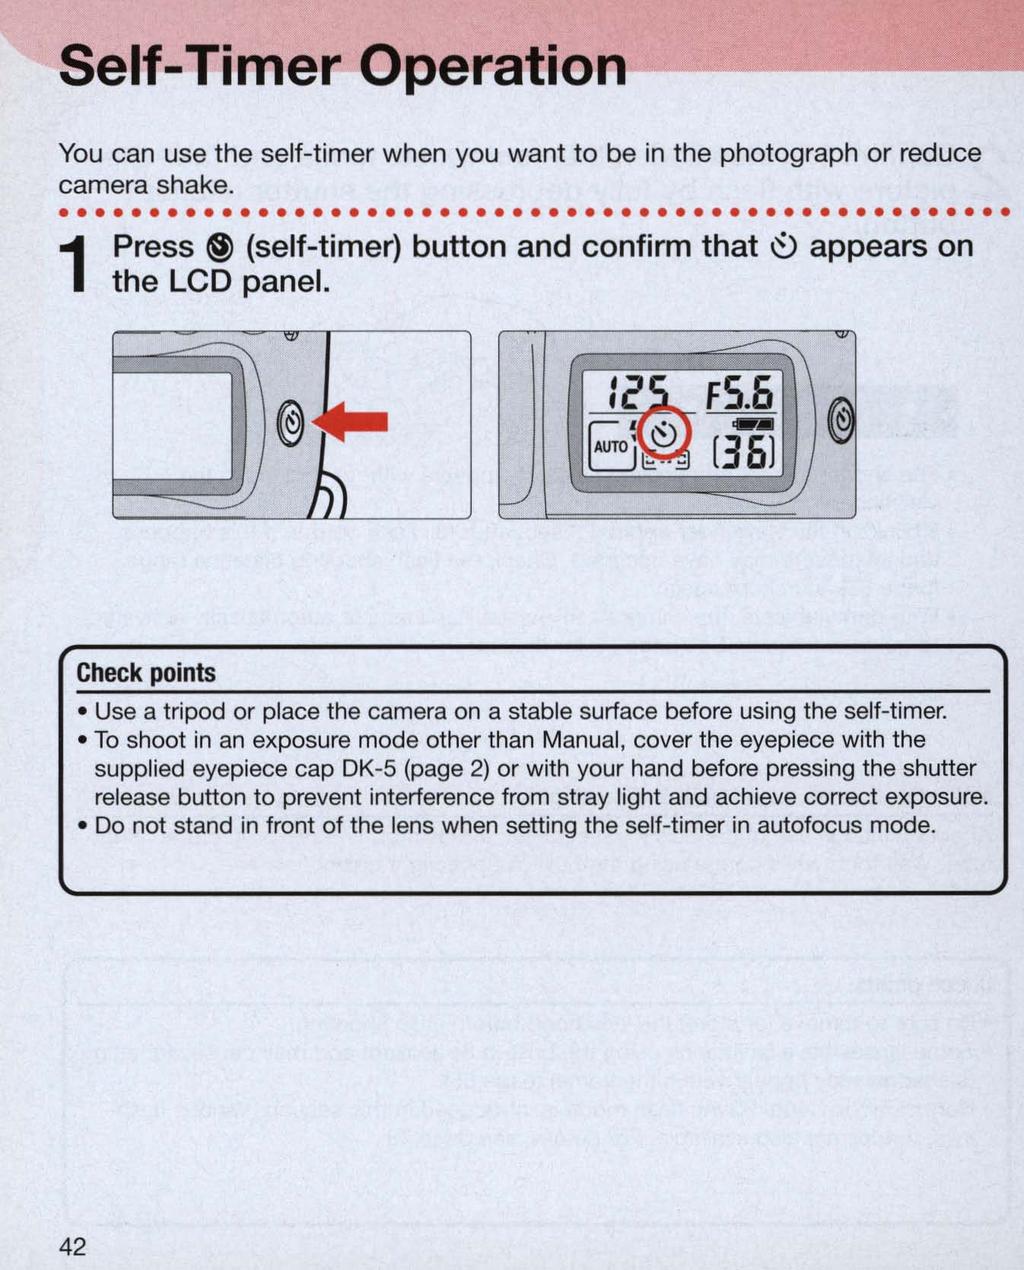 Self-Timer- Operation-~~~-- You can use the self-timer when you want to be in the photograph or reduce camera shake................................ 1 Press @ (self-timer) button and confirm that ~ appears on the LCD panel.